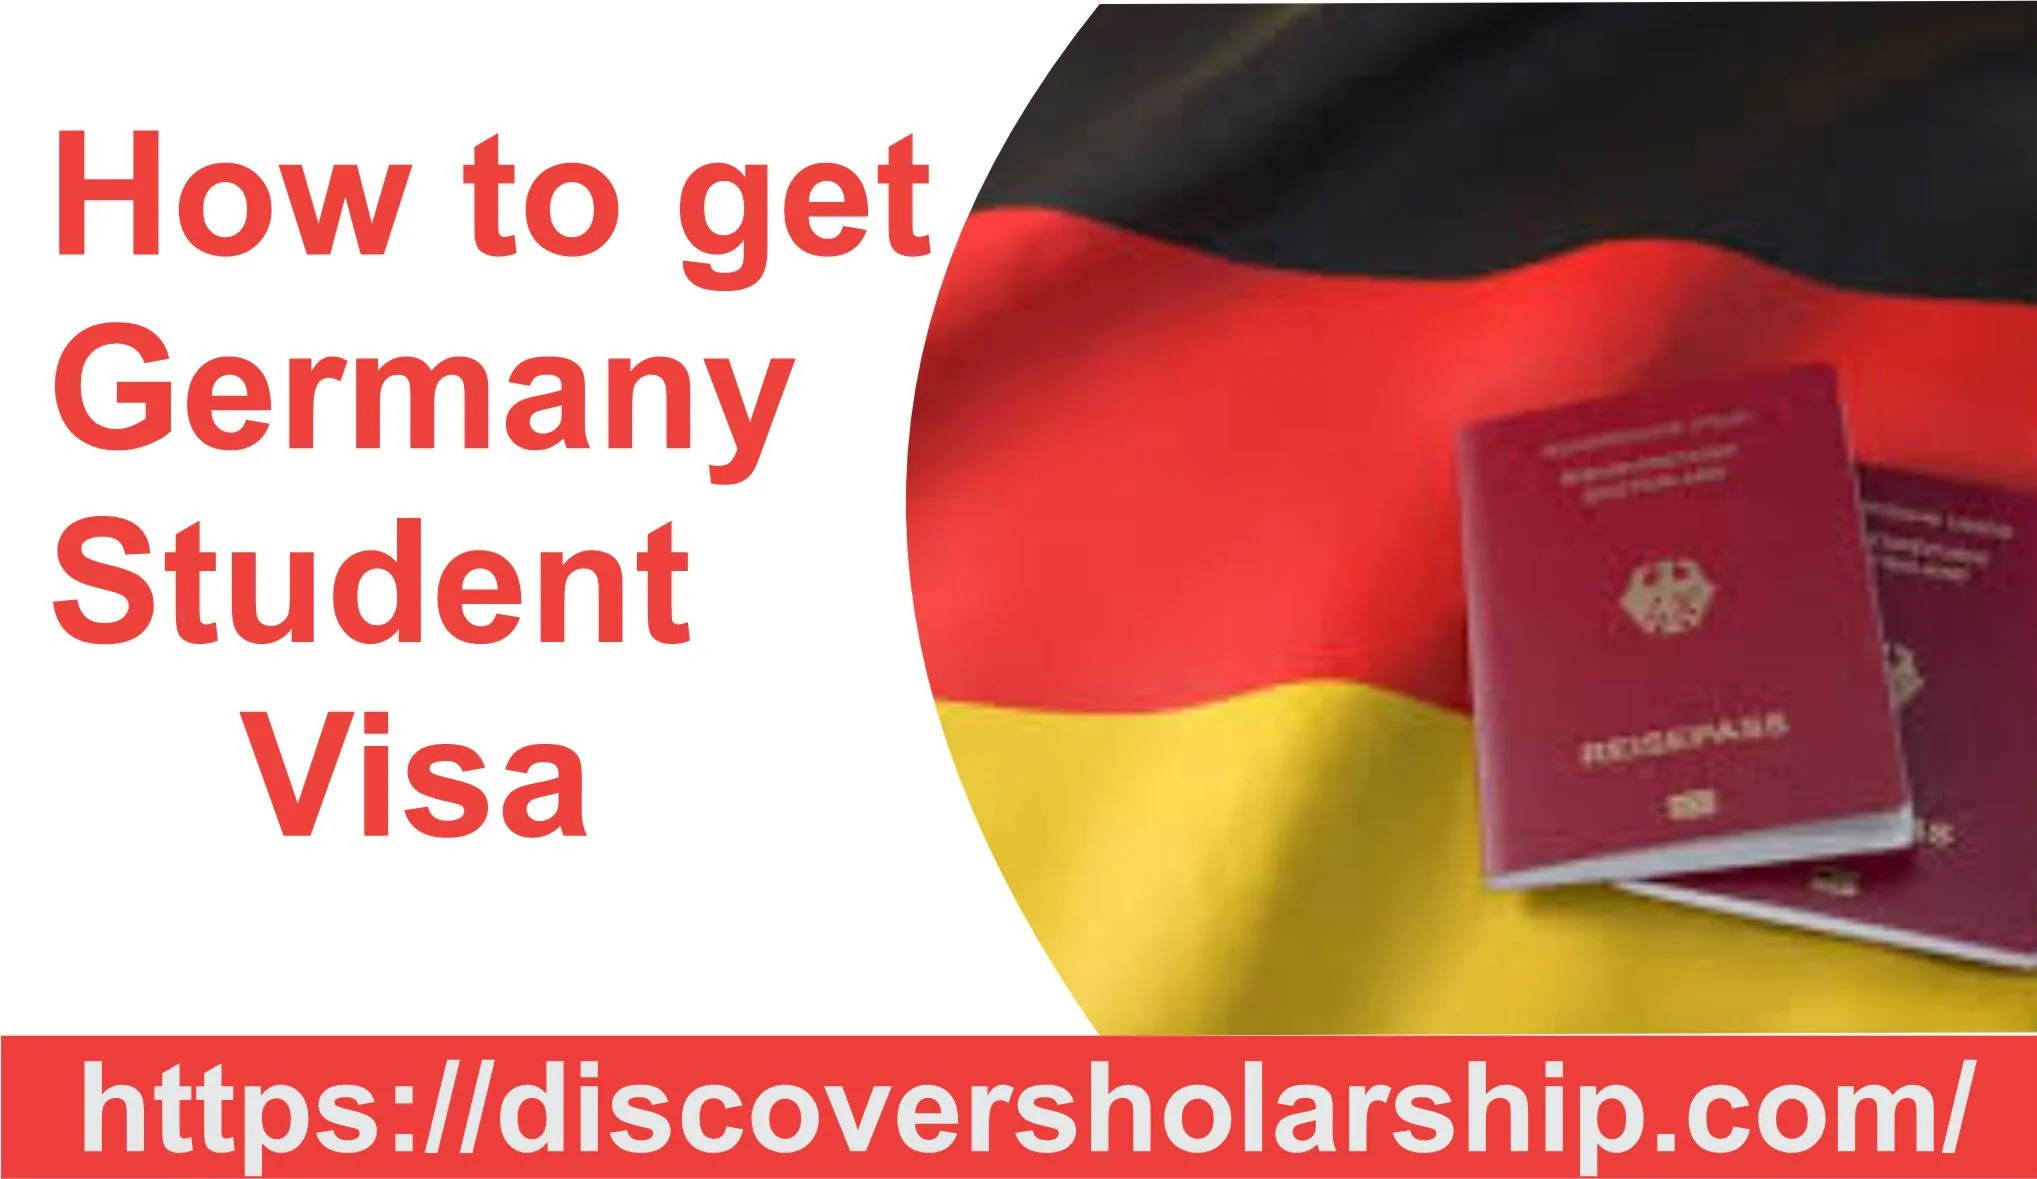 How to get germany study visa